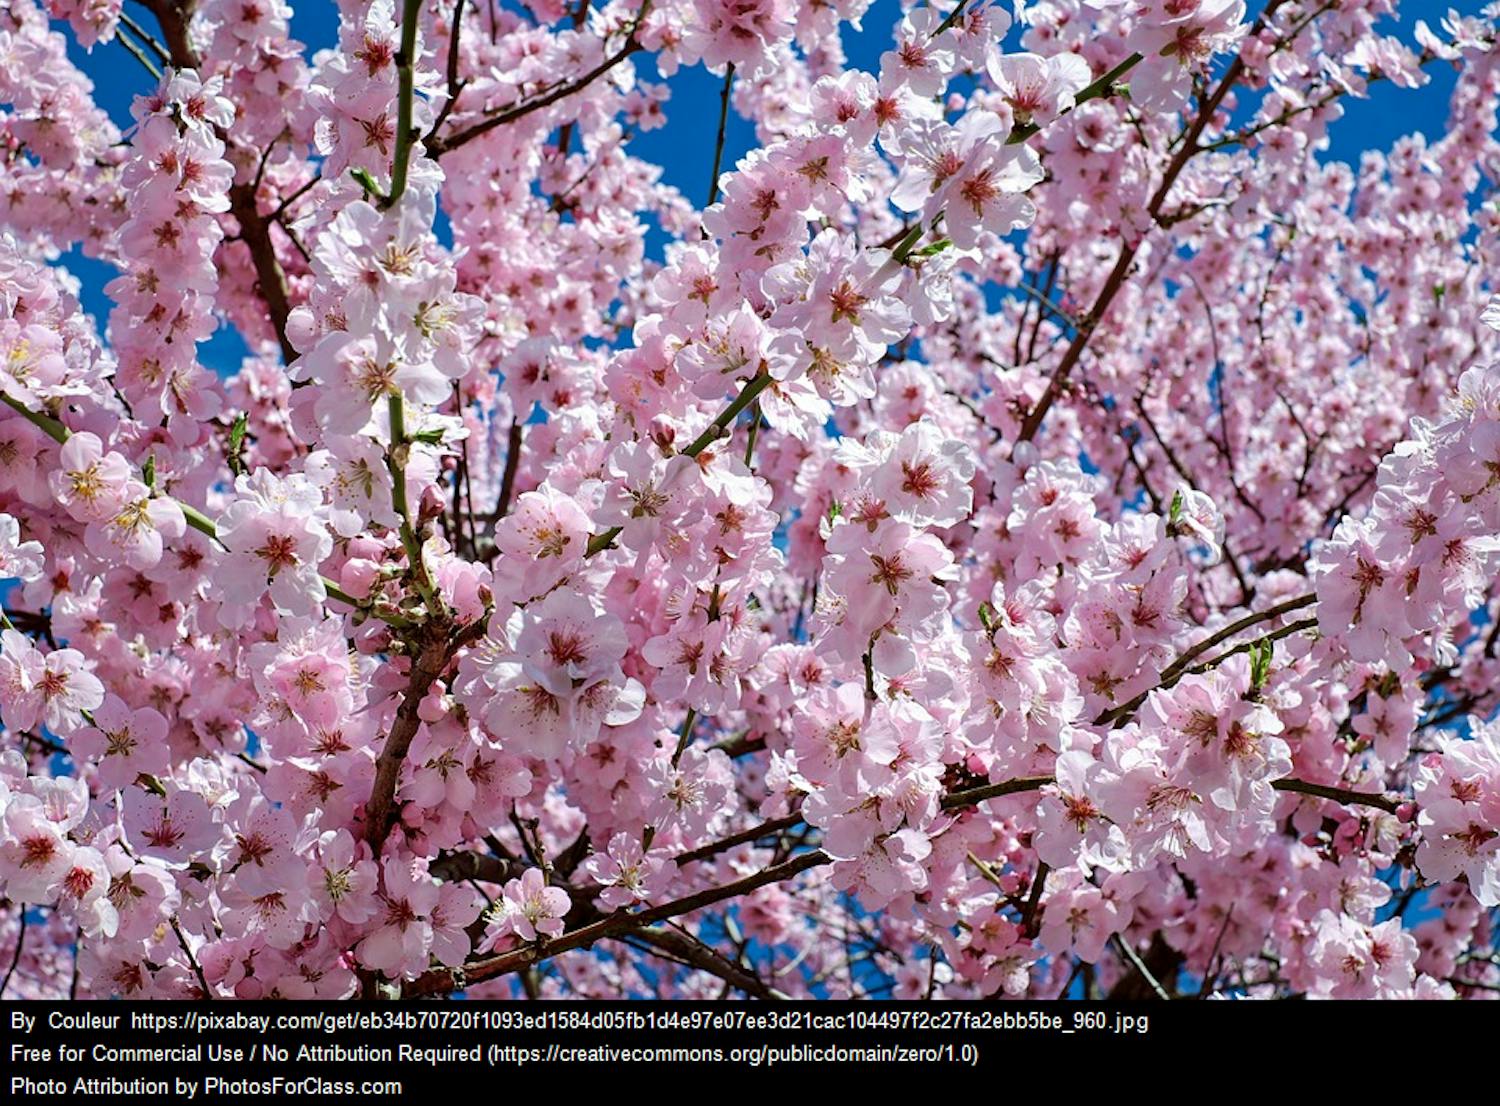 Celebrate cherry blossoms and more this weekend in D.C.